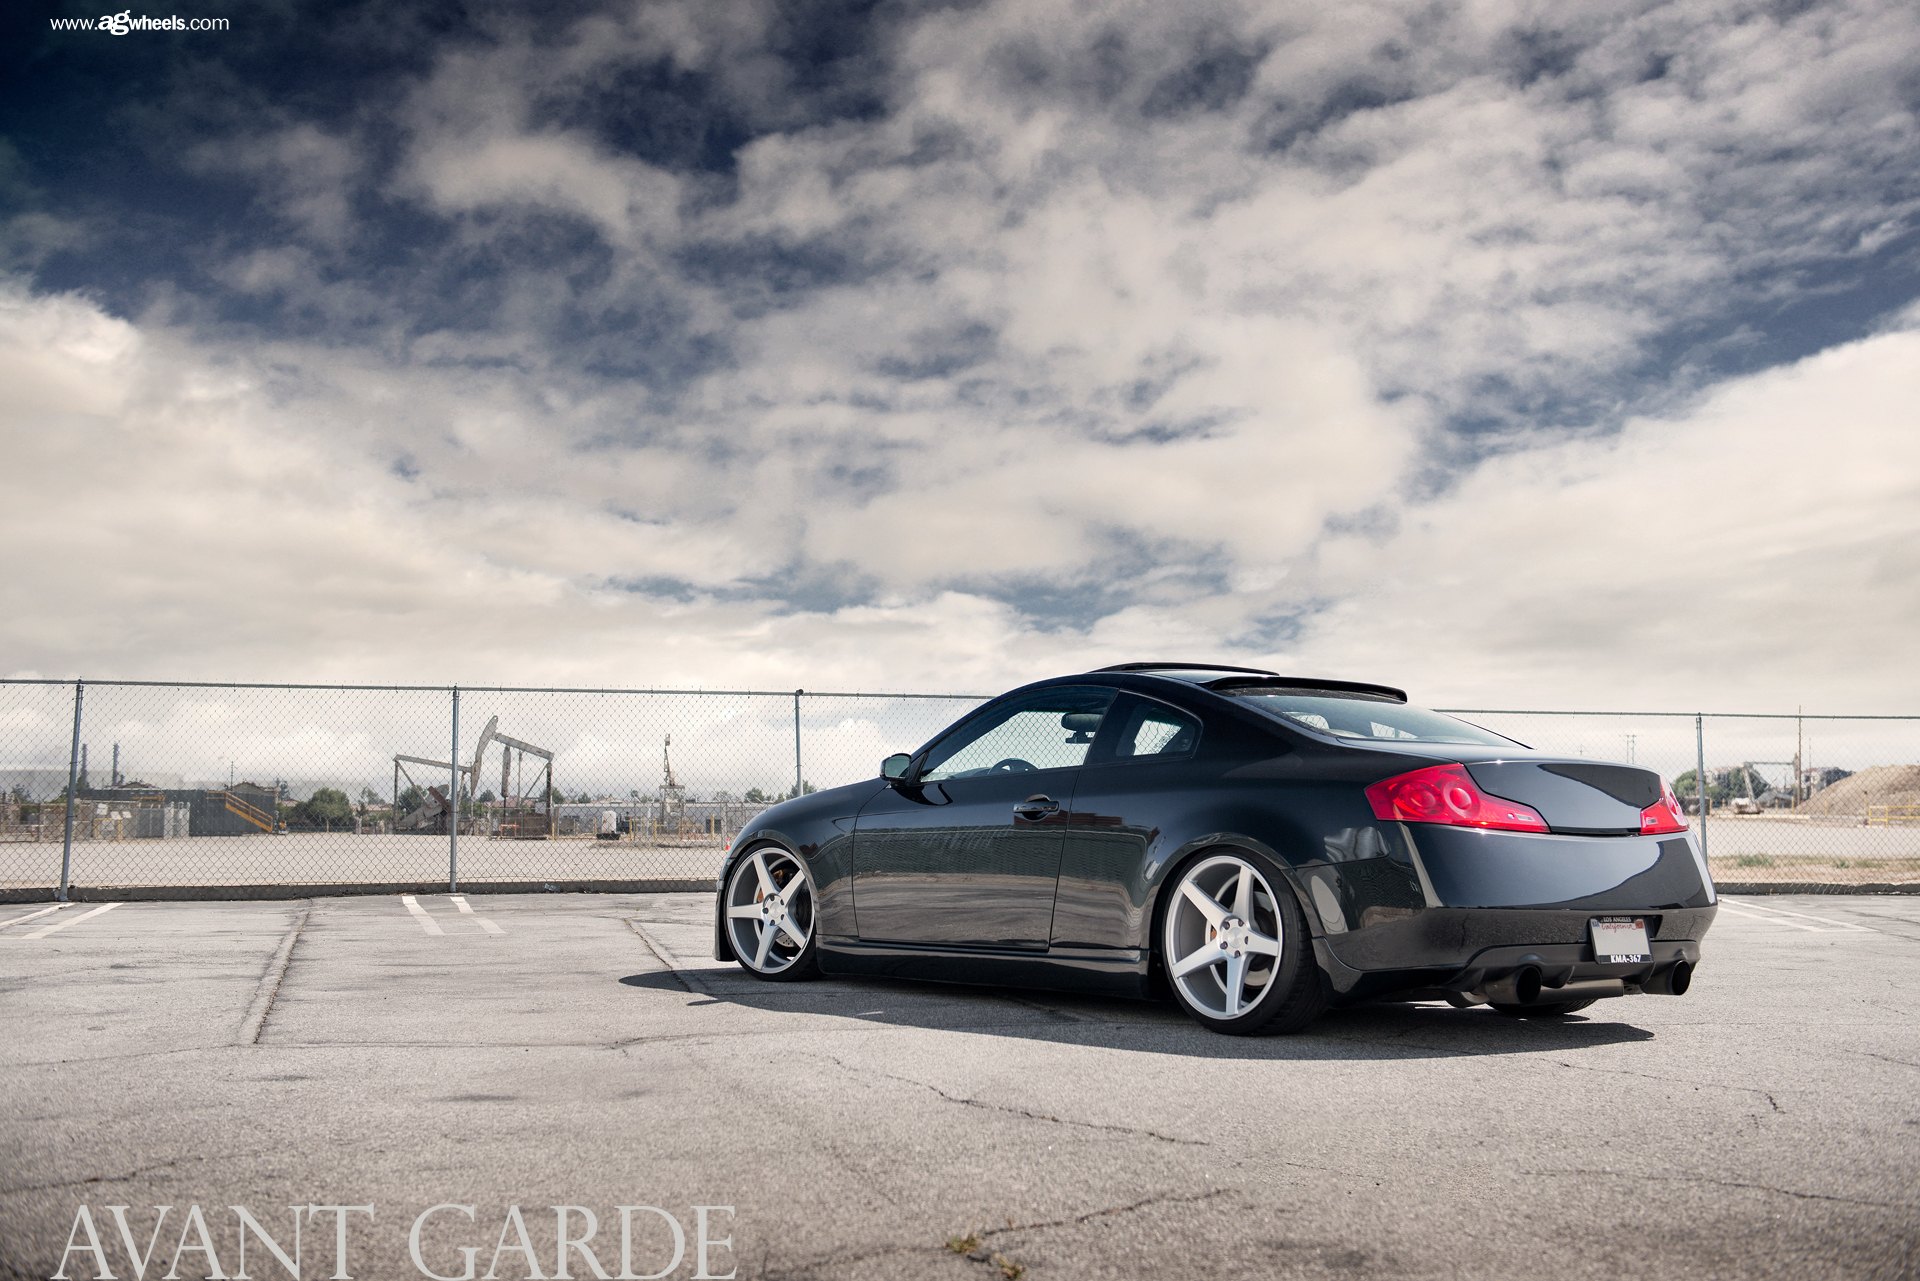 Black Infiniti G35 with Red LED Taillights - Photo by Avant Garde Wheels